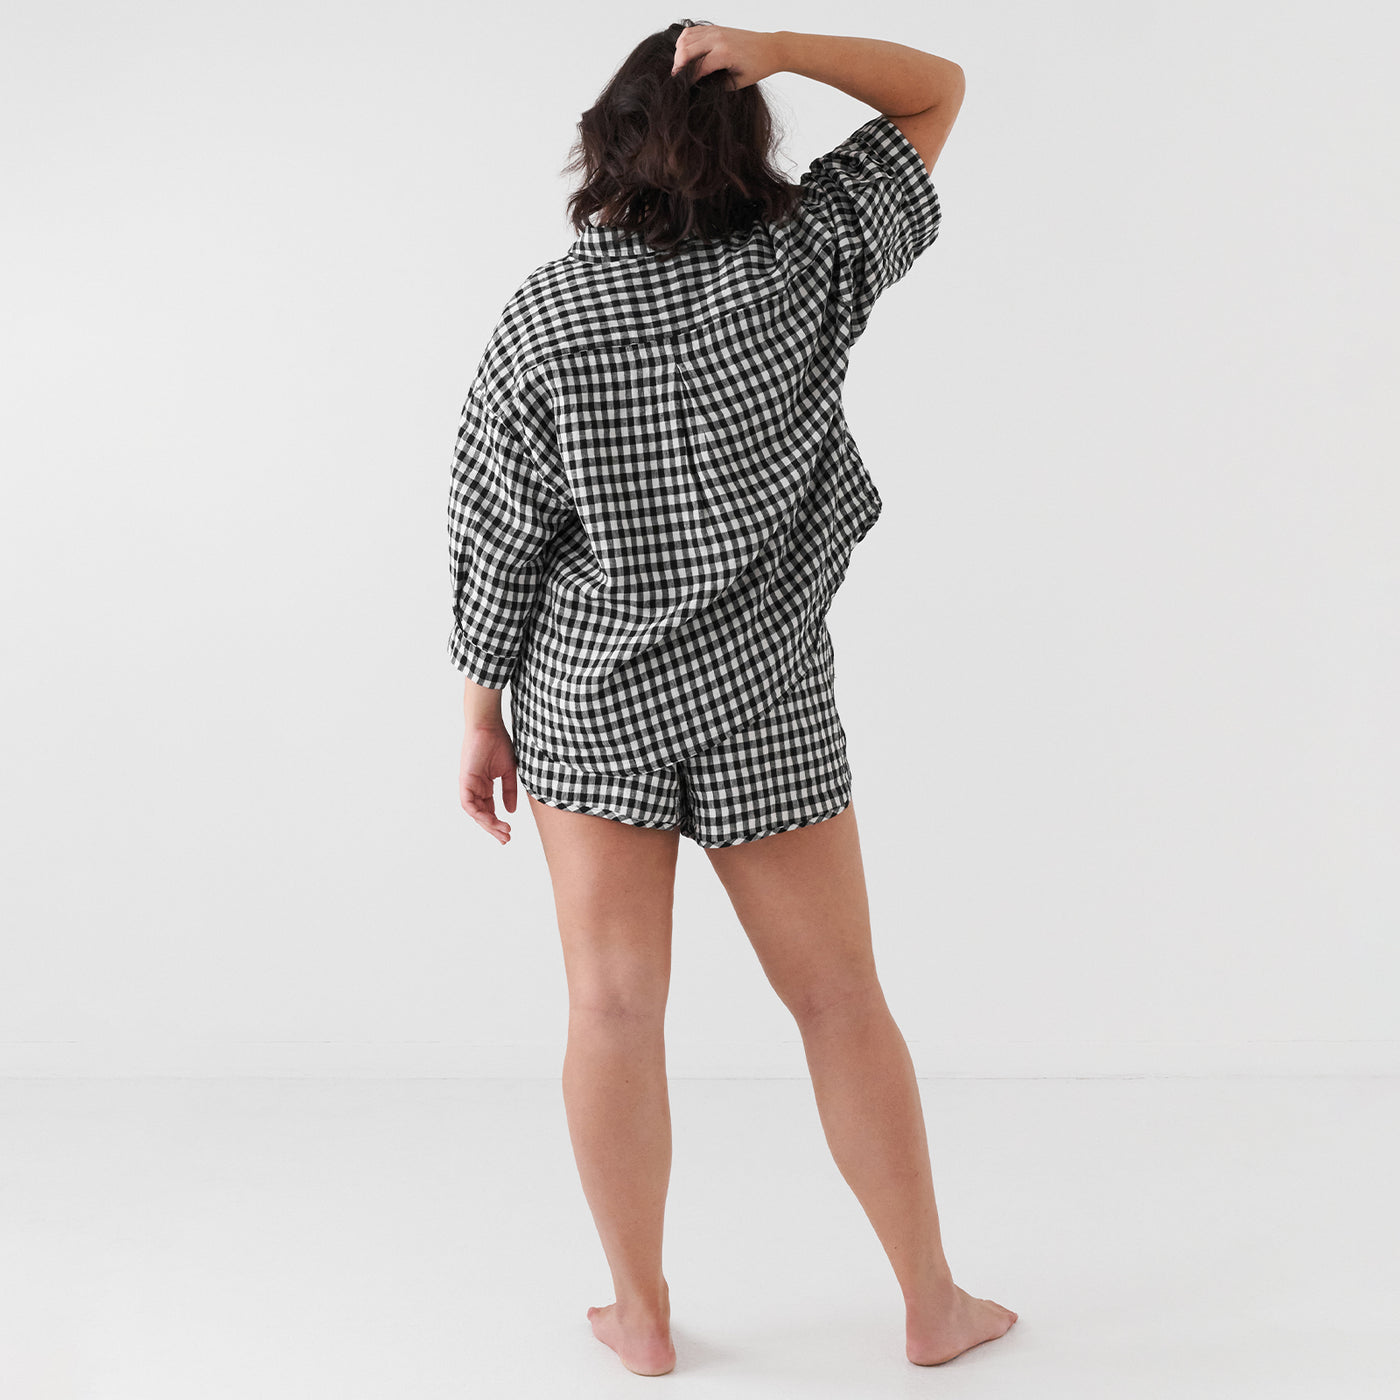 French Flax Linen Relax Short in Charcoal Gingham